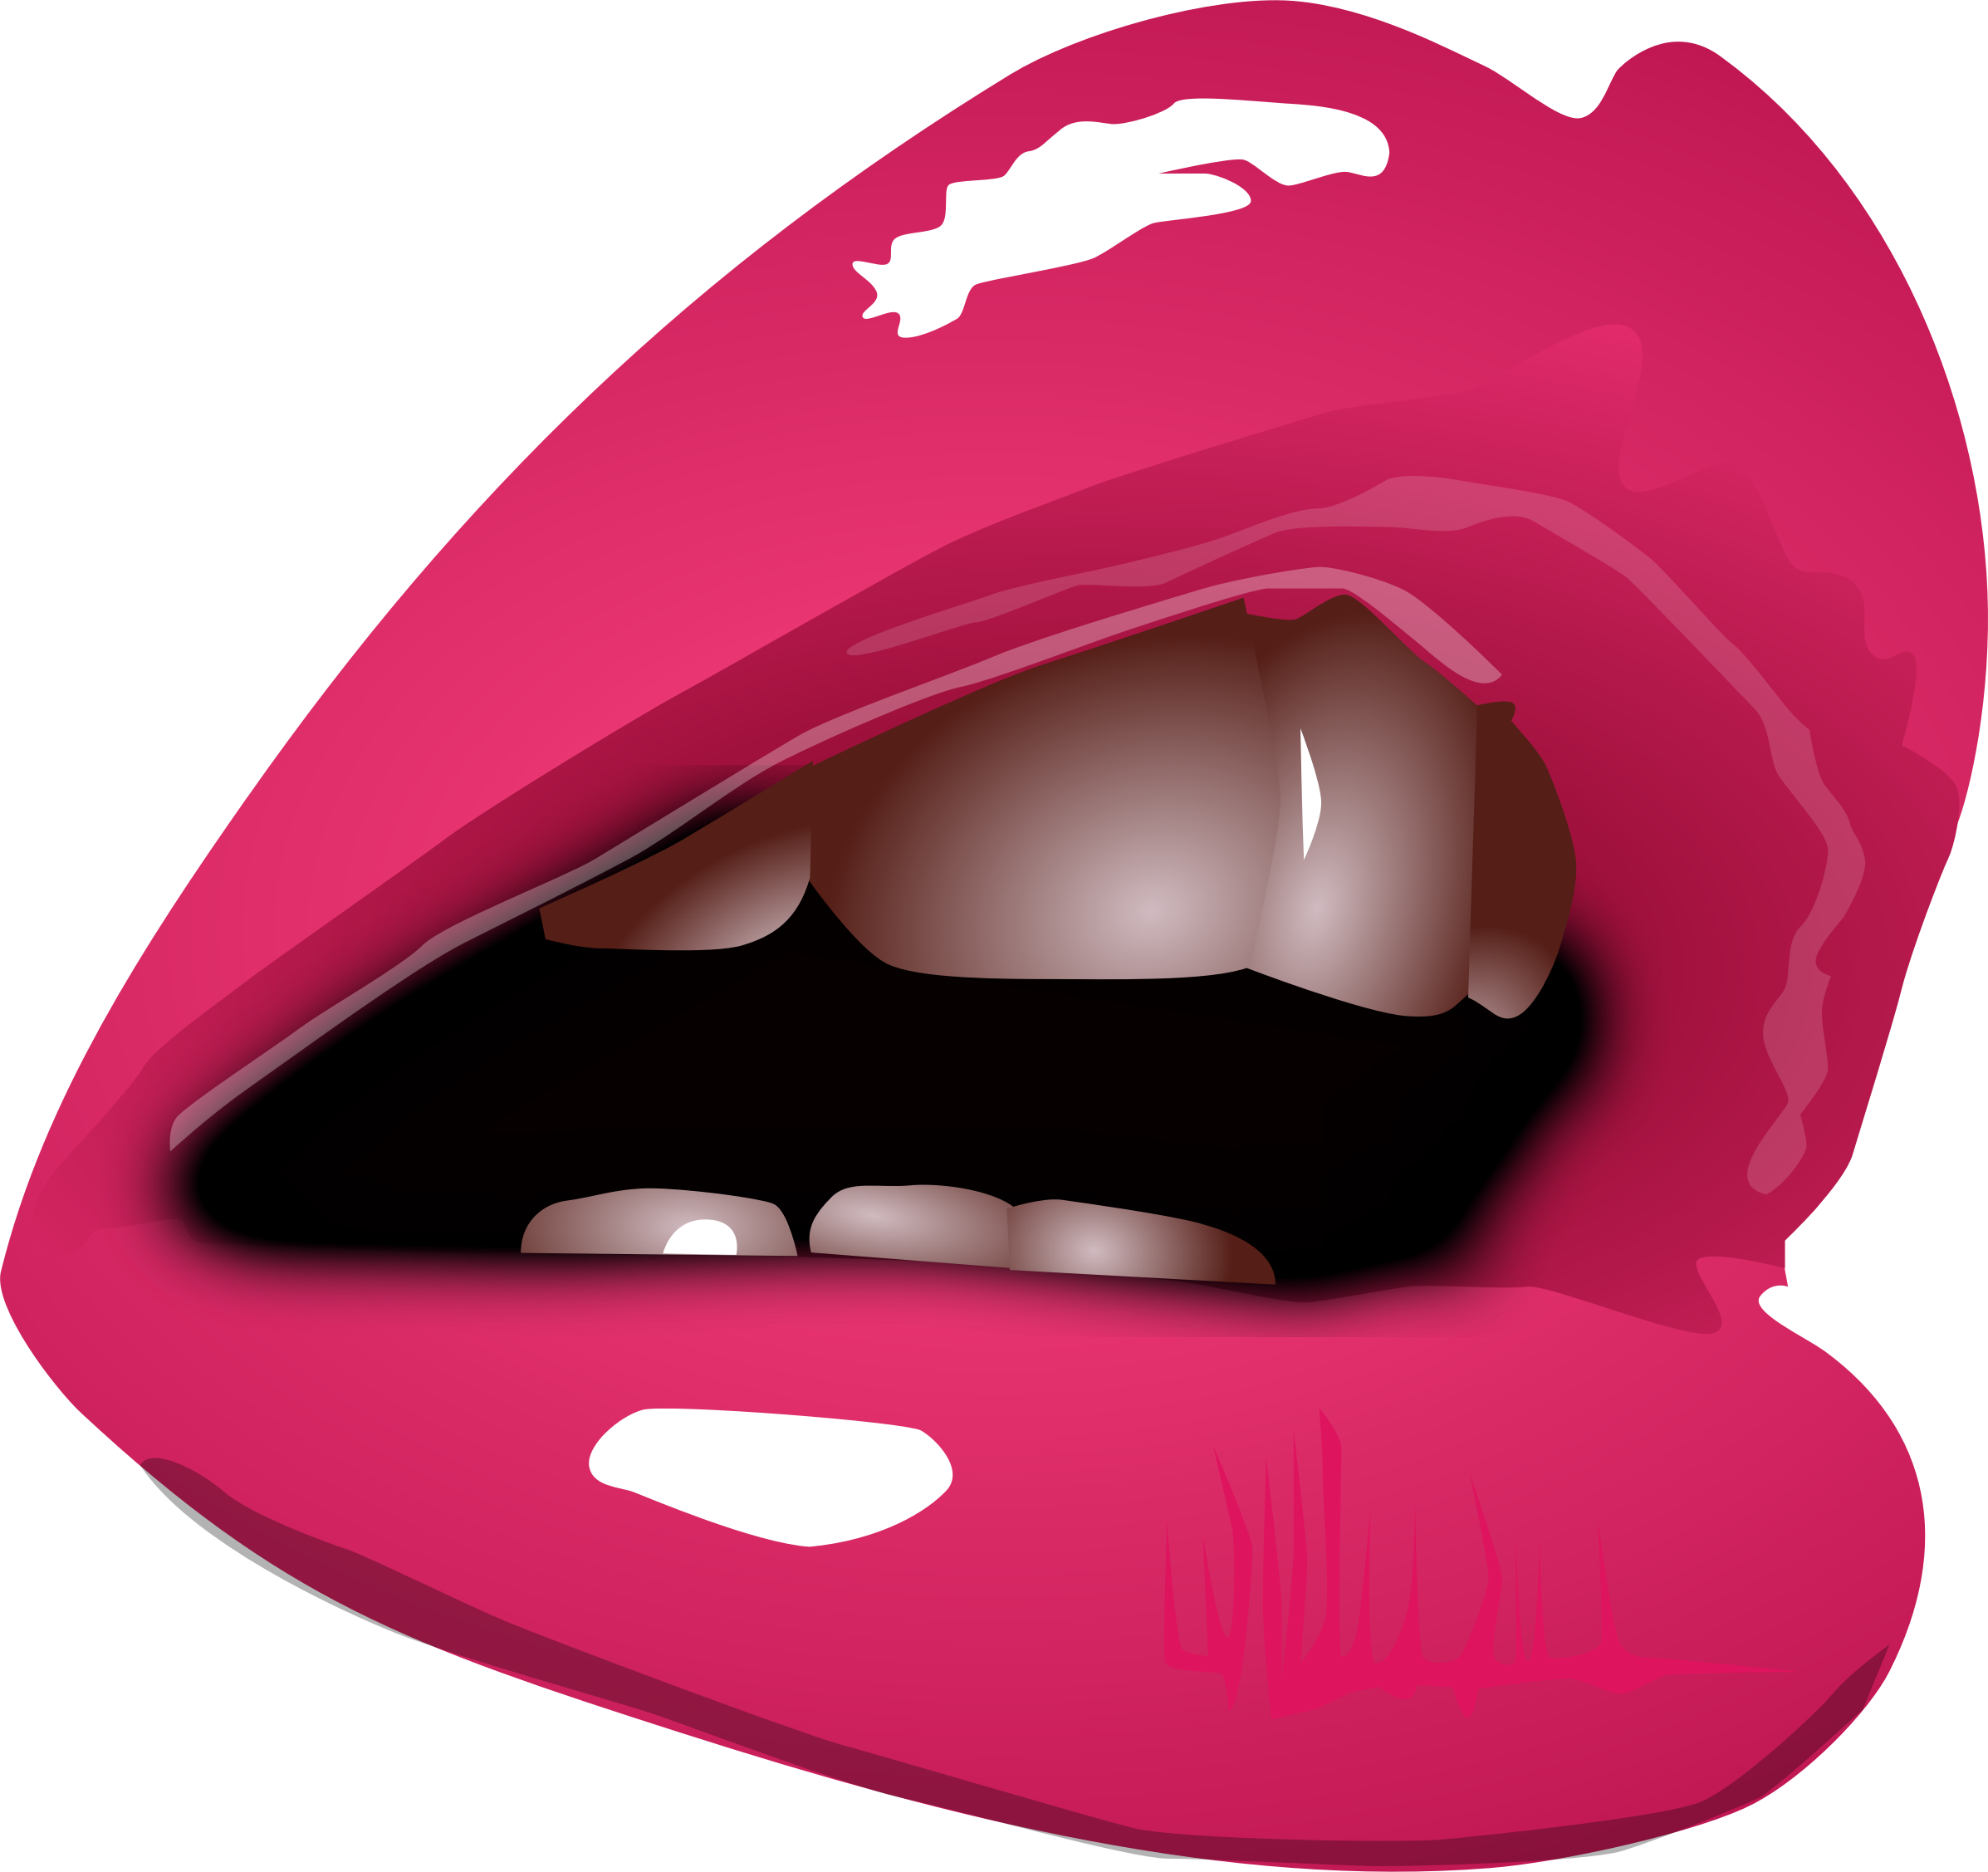 Lips clipart wallpaper, Lips wallpaper Transparent FREE for download on WebStockReview 2021